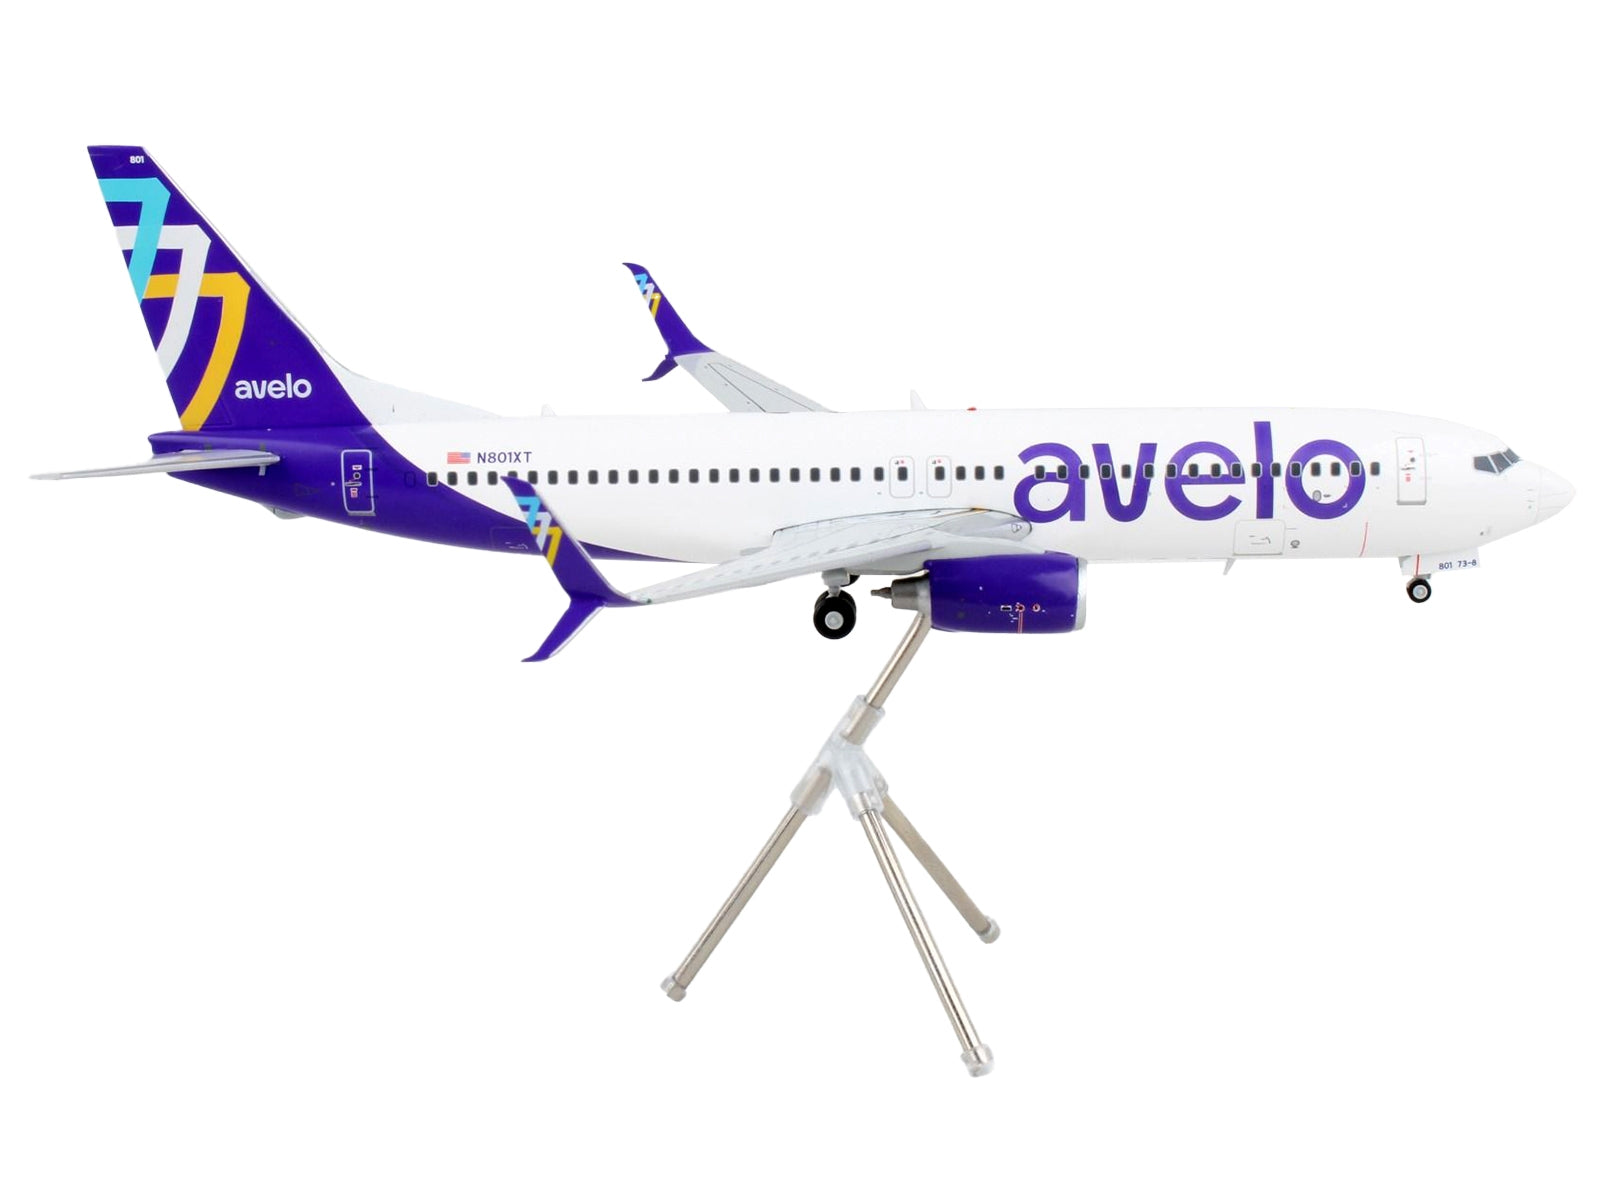 Boeing 737-800 Commercial Aircraft "Avelo Airlines" White with Purple Tail "Gemini 200" Series 1/200 Diecast Model Airplane by GeminiJets